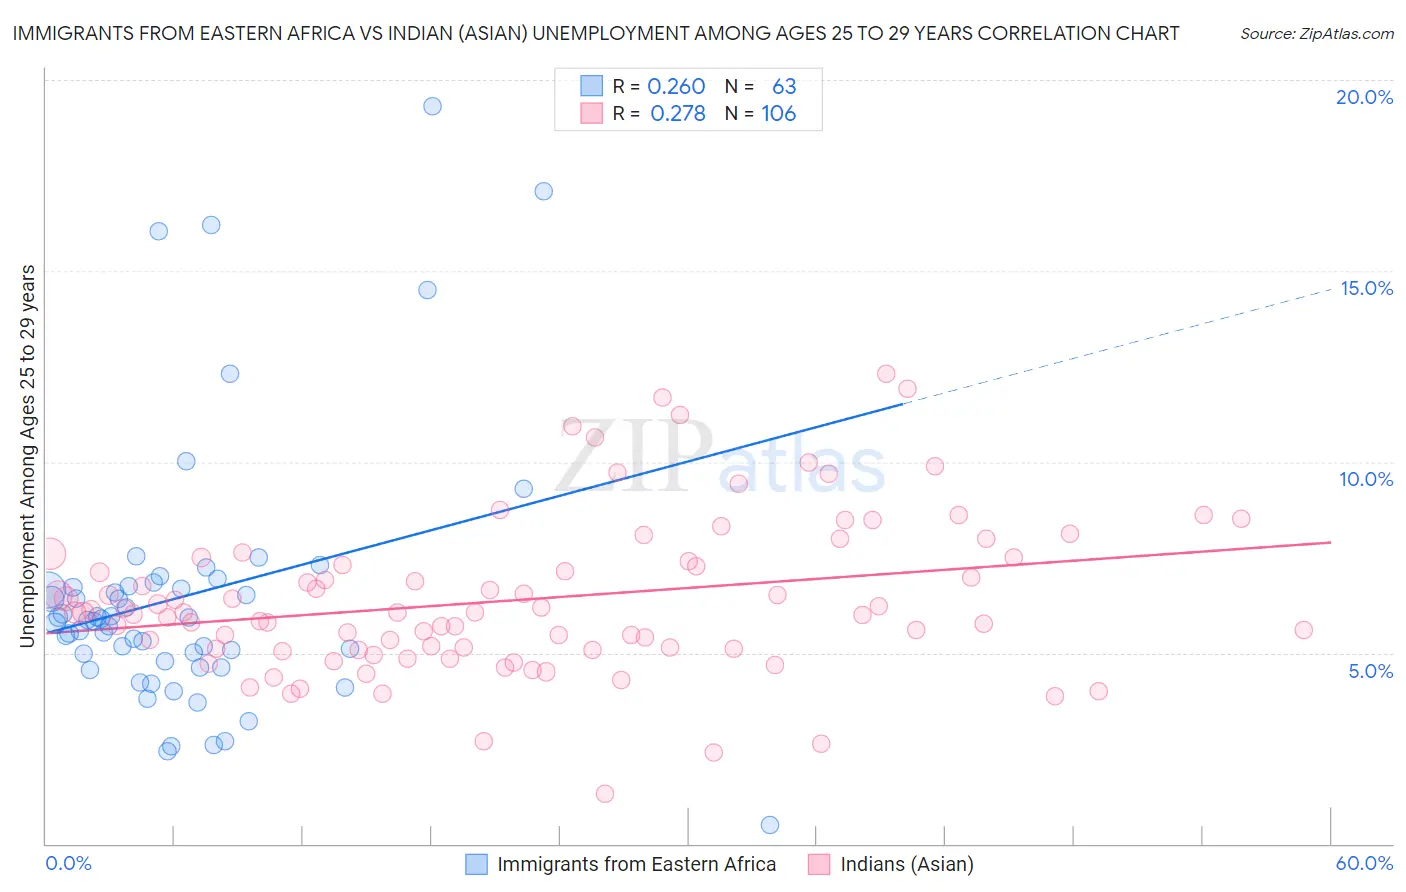 Immigrants from Eastern Africa vs Indian (Asian) Unemployment Among Ages 25 to 29 years